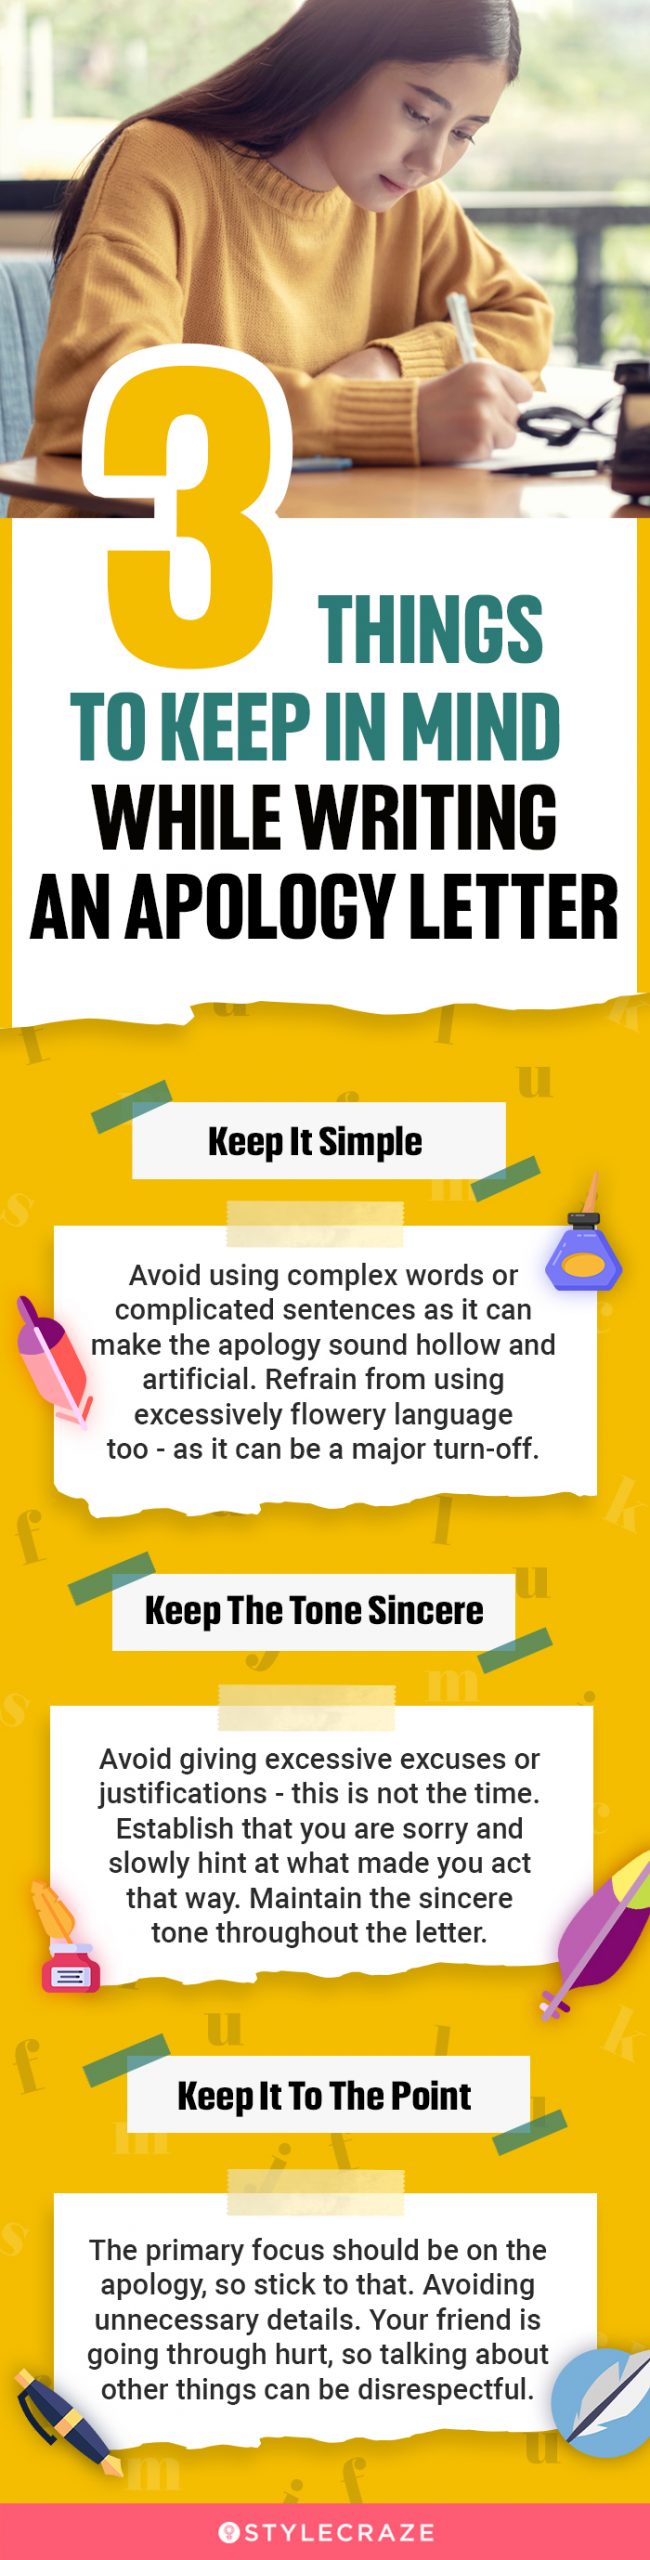 3 things to keep in mind while writing an apology letter (infographic)